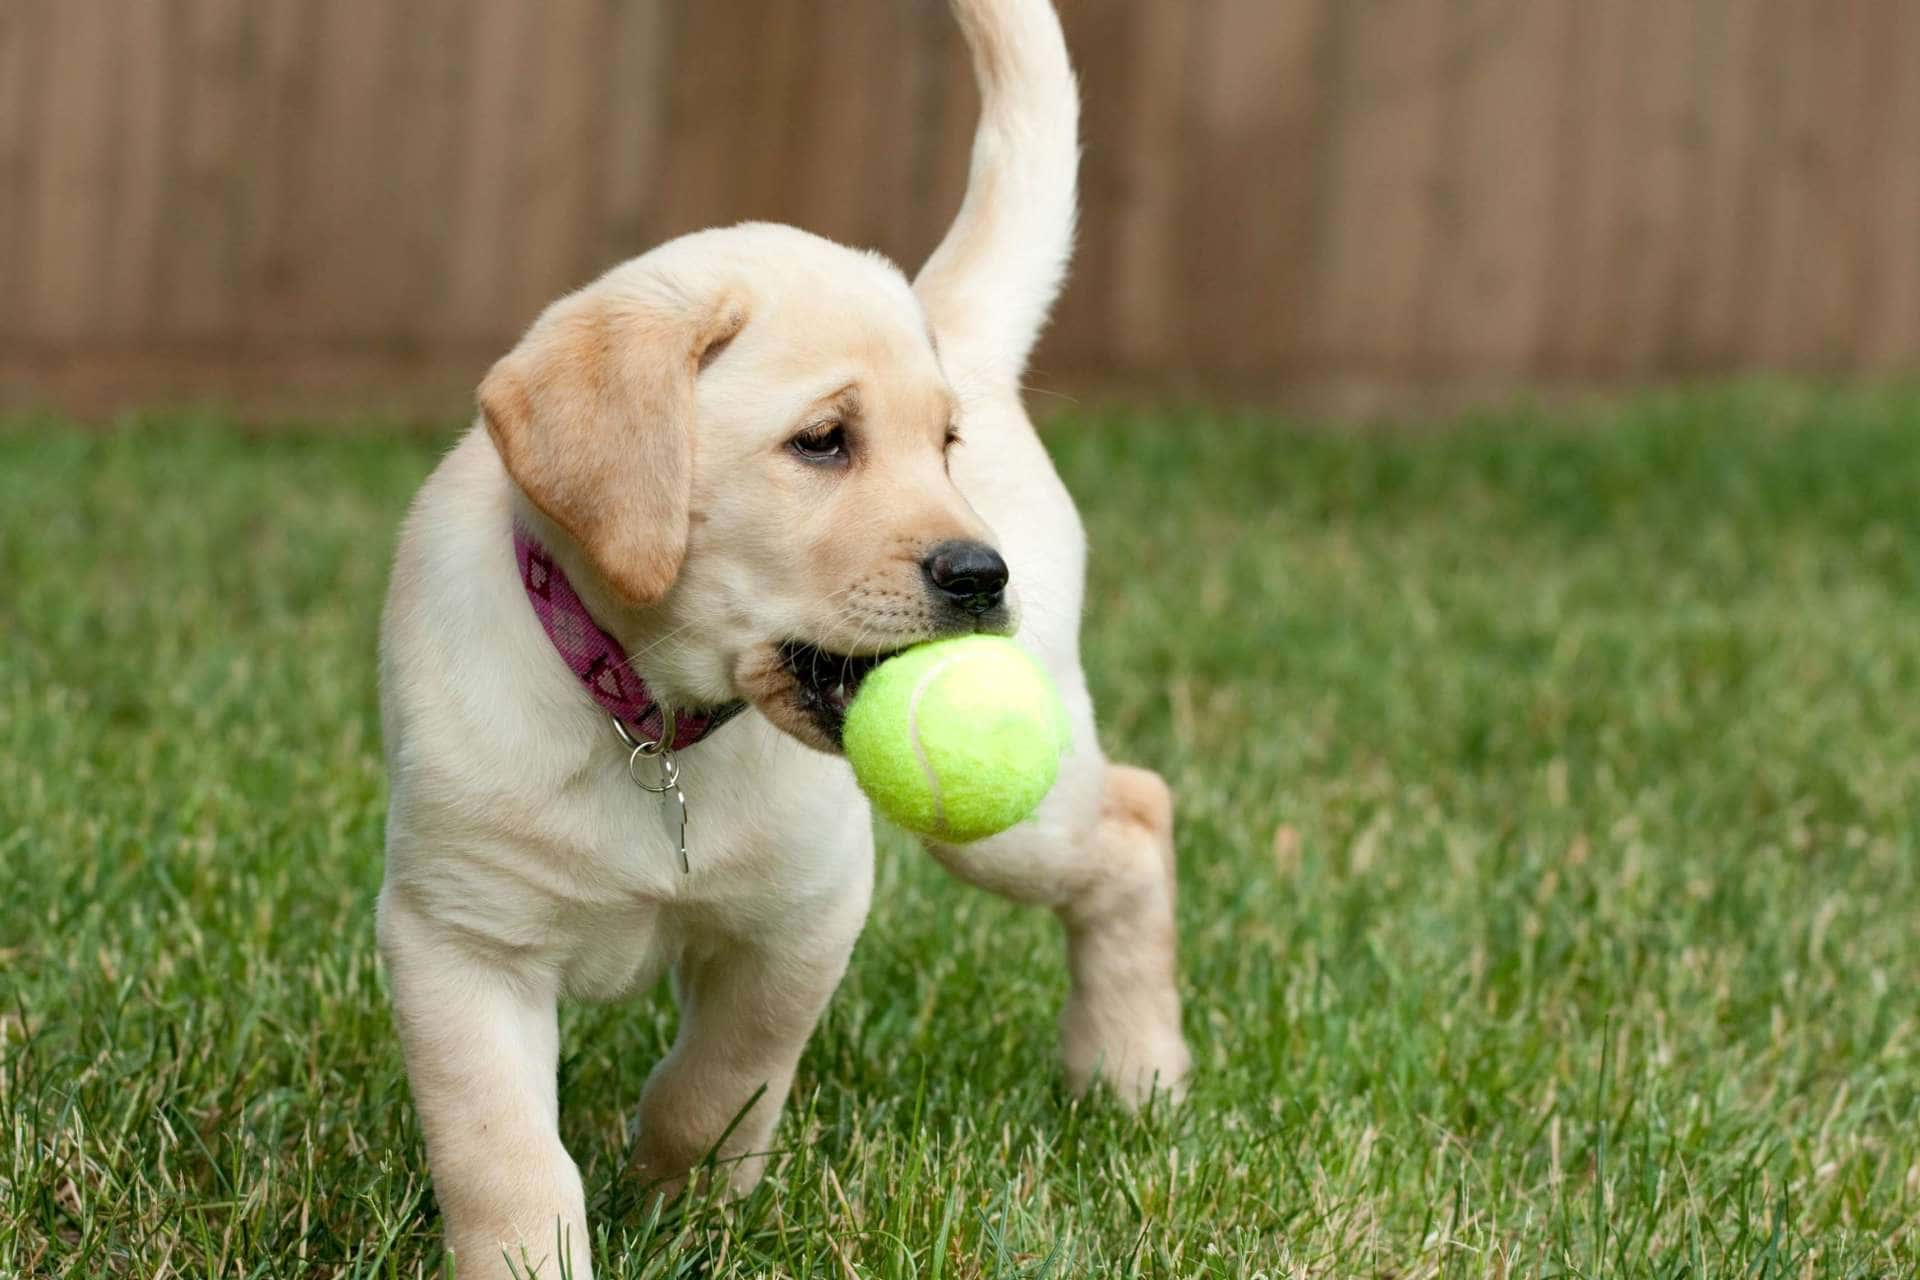 lab pup with tennis ball in his/her mouth